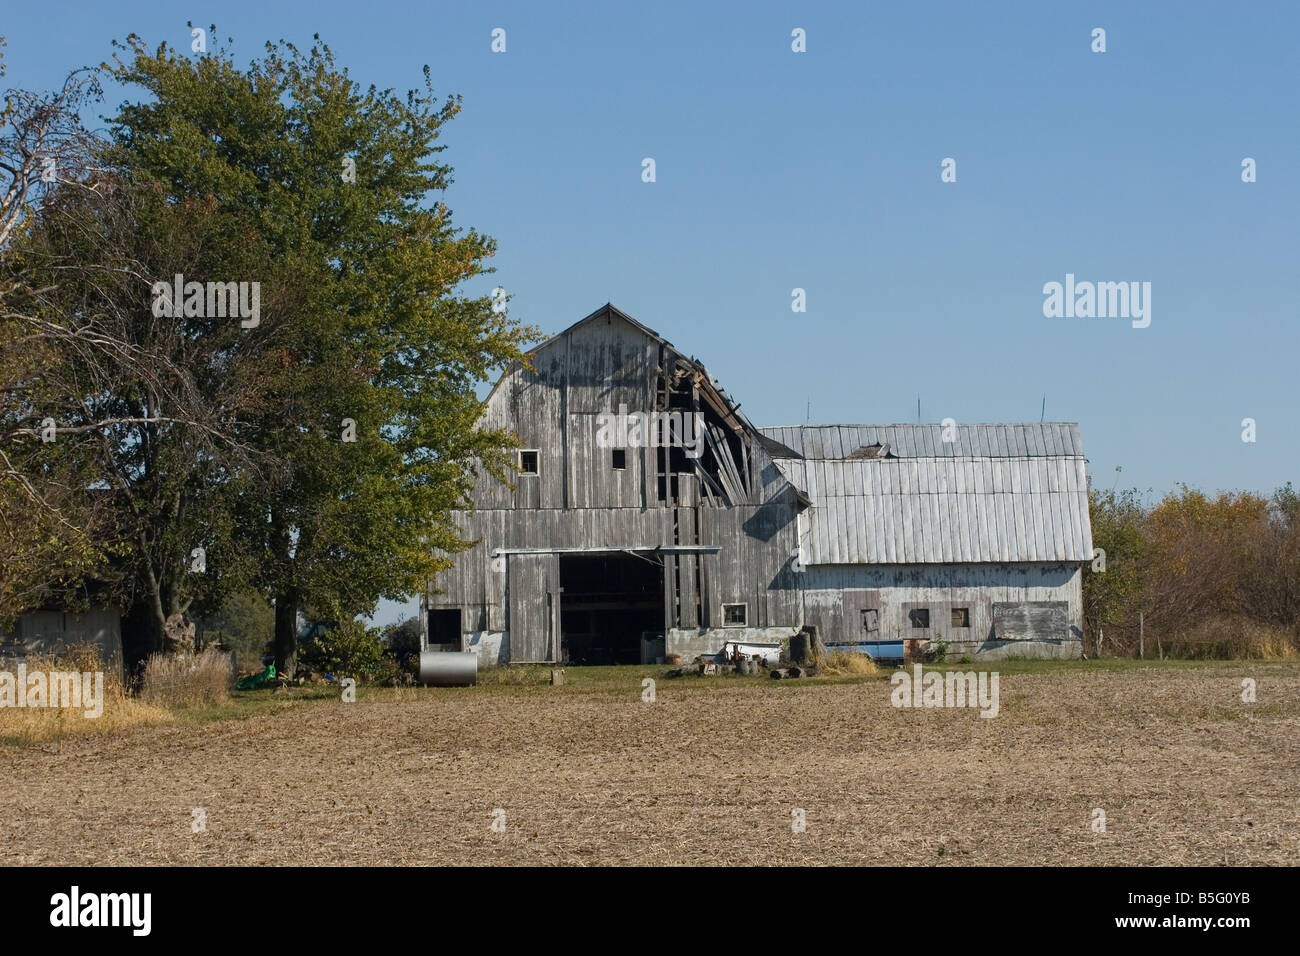 Old wooden barn disintegrating and falling down Stock Photo